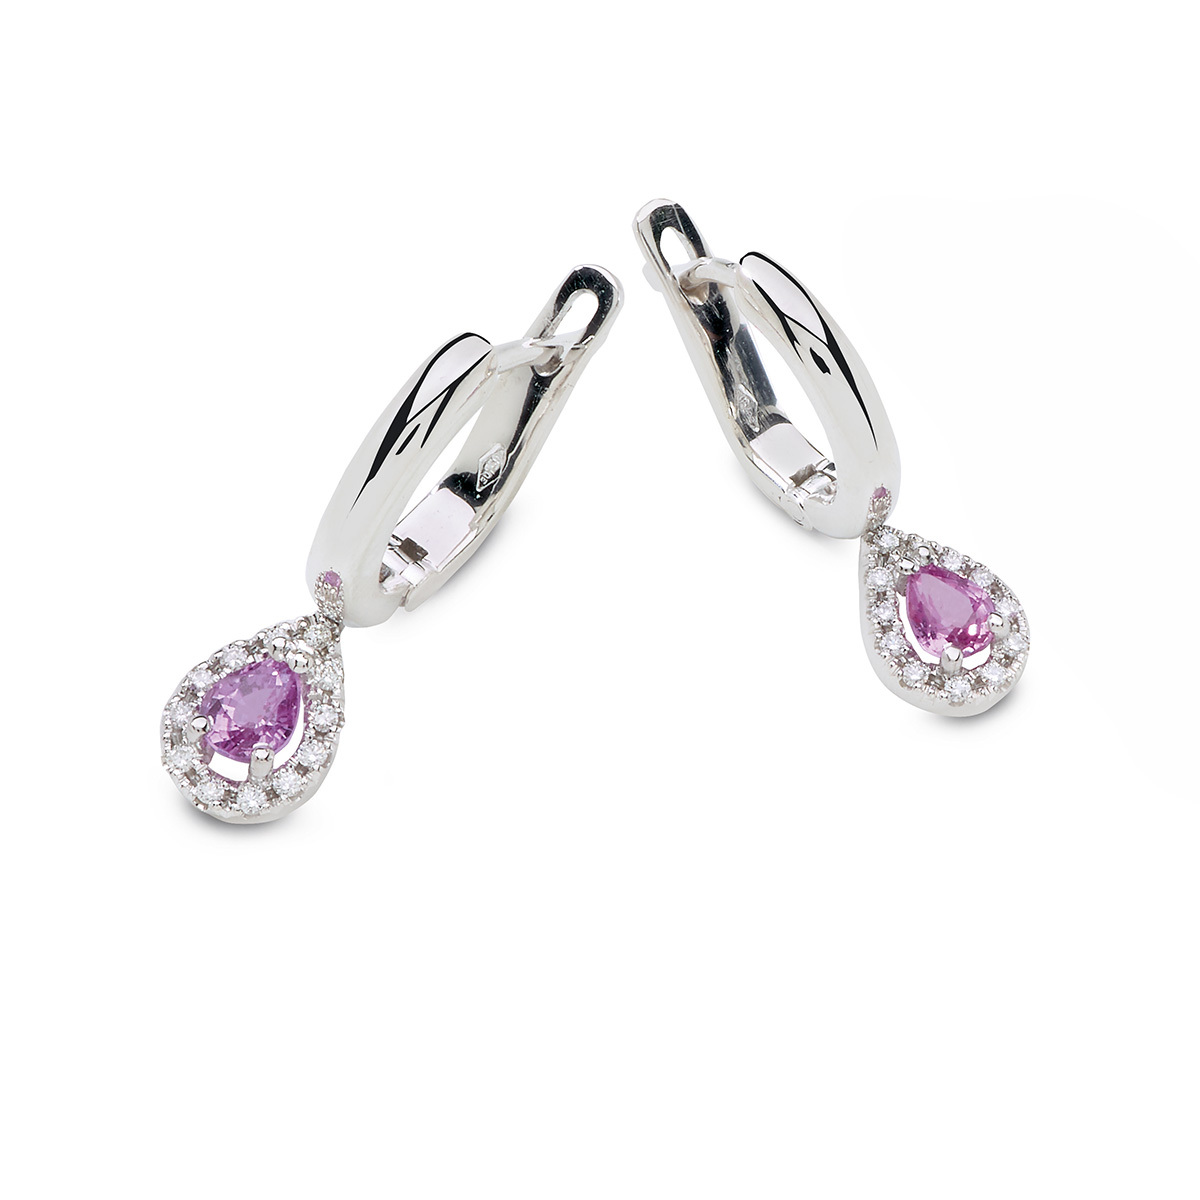 Exel collection jewels earrings pink sapphire